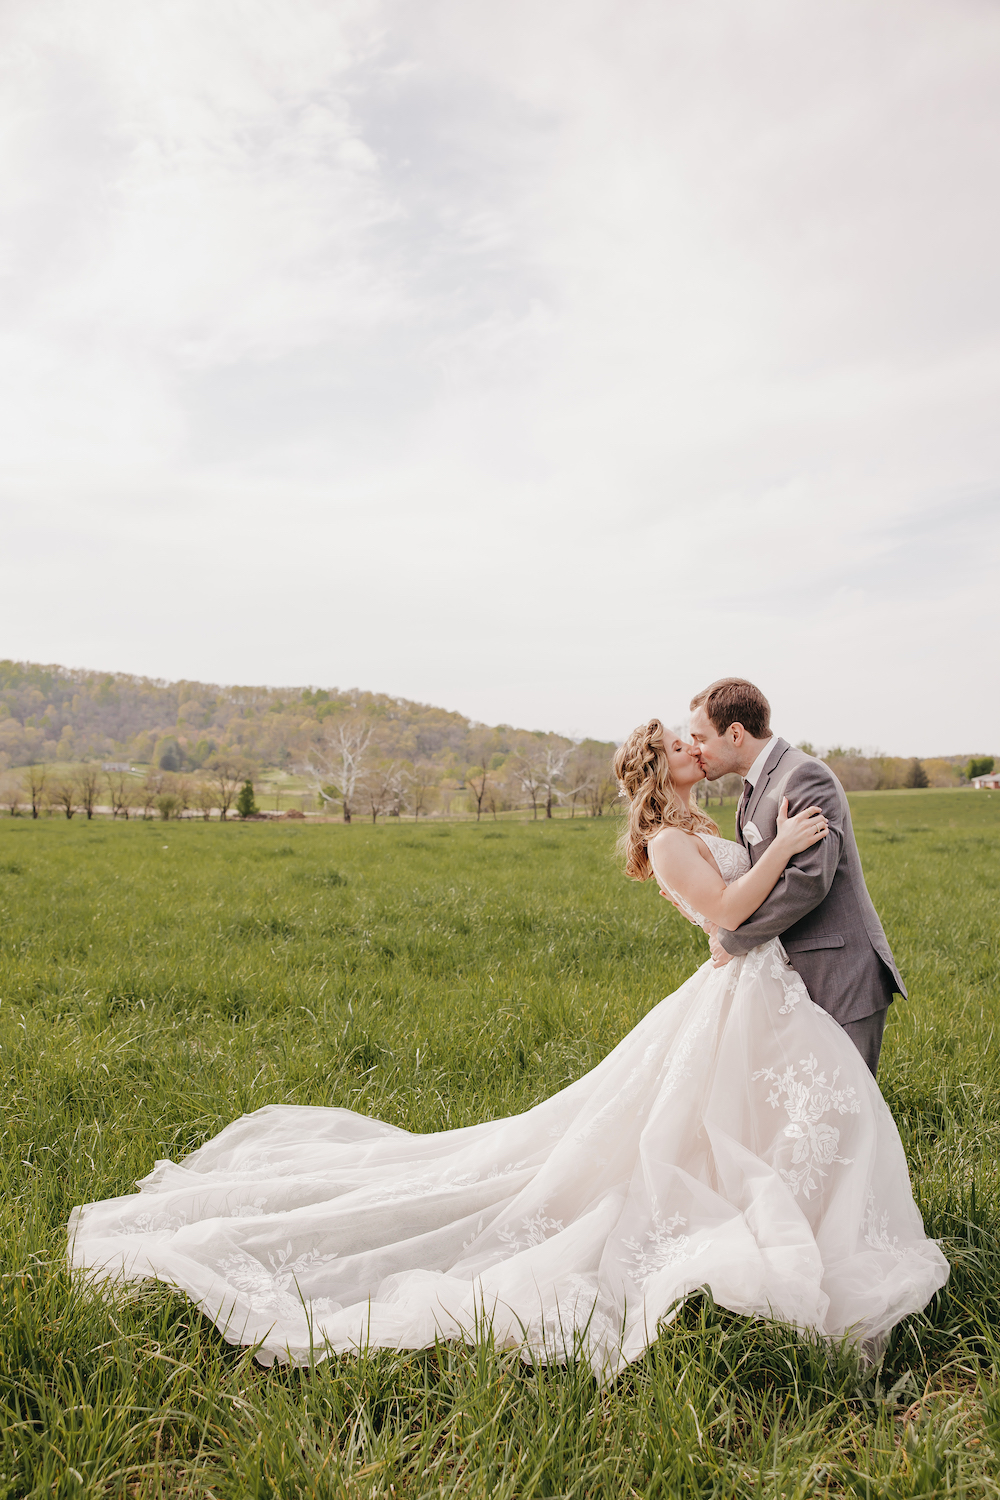 Bride and groom sharing an embrace during their wedding shoot at Fox Meadow Barn